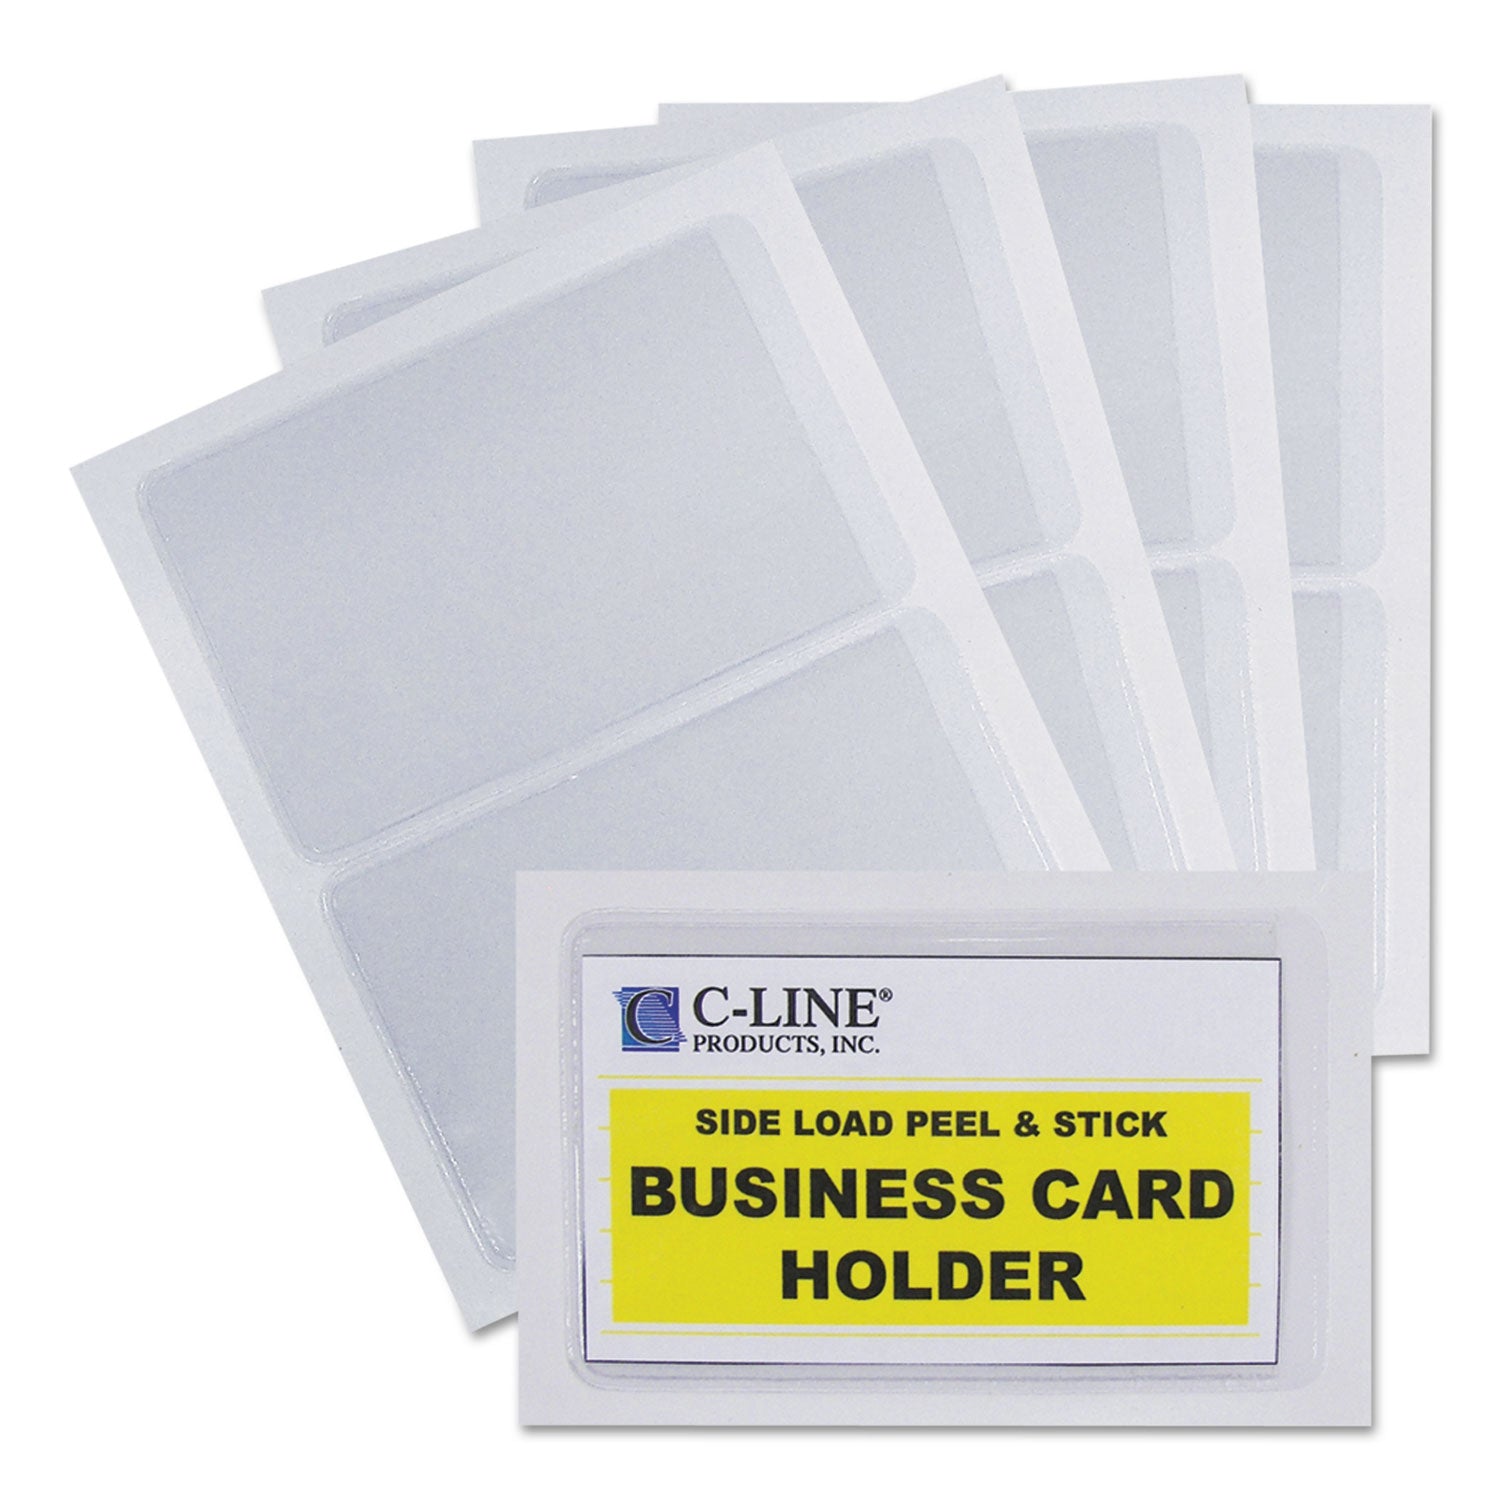 Self-Adhesive Business Card Holders, Side Load, 2 x 3.5, Clear, 10/Pack - 